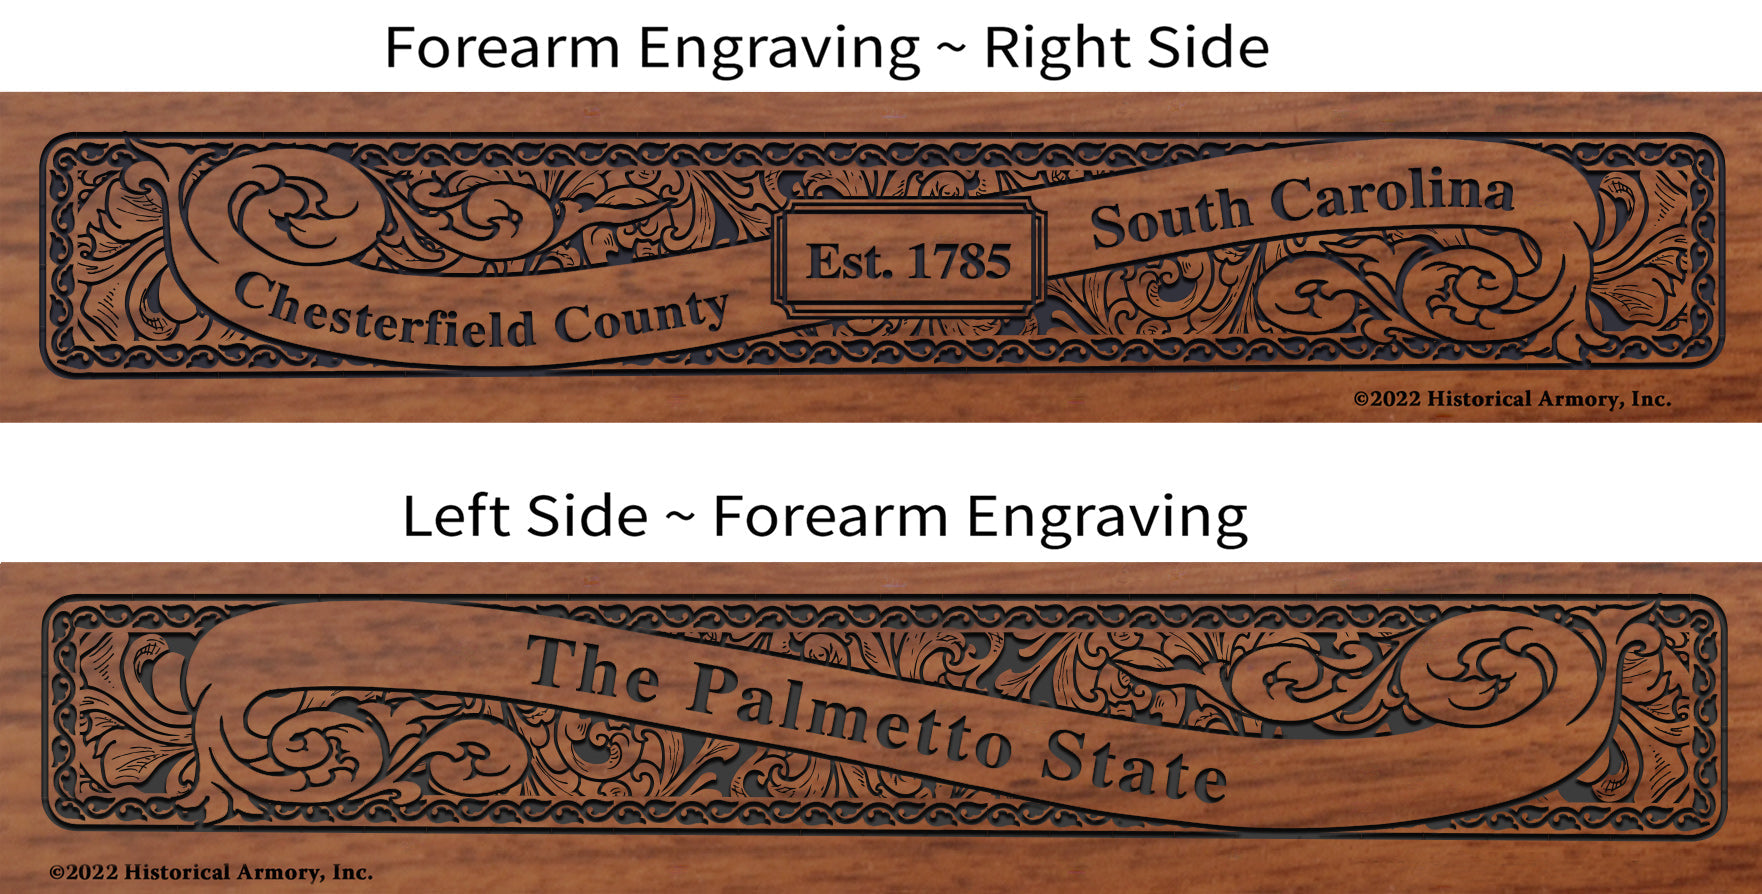 Chesterfield County South Carolina Engraved Rifle Forearm